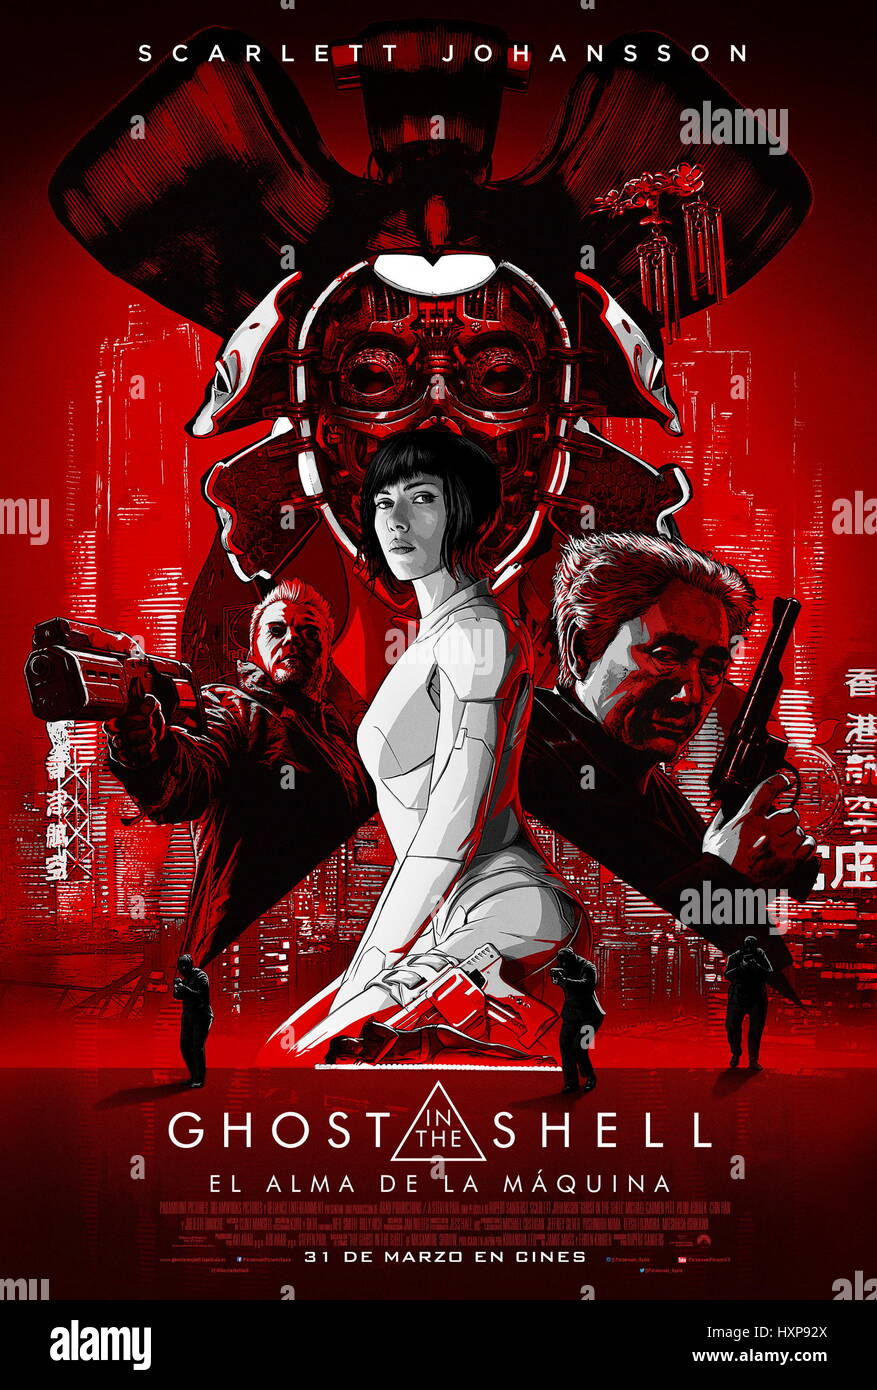 RELEASE DATE: March 31, 2017 TITLE: Ghost in the Shell STUDIO: DreamWorks DIRECTOR: Rupert Sanders PLOT: In the near future, Major is the first of her kind: A human saved from a terrible crash, who is cyber-enhanced to be a perfect soldier devoted to stopping the world's most dangerous criminals STARRING: Scarlett Johansson as Major, Poster Art. (Credit: © DreamWorks/Entertainment Pictures/ZUMAPRESS.com) Stock Photo